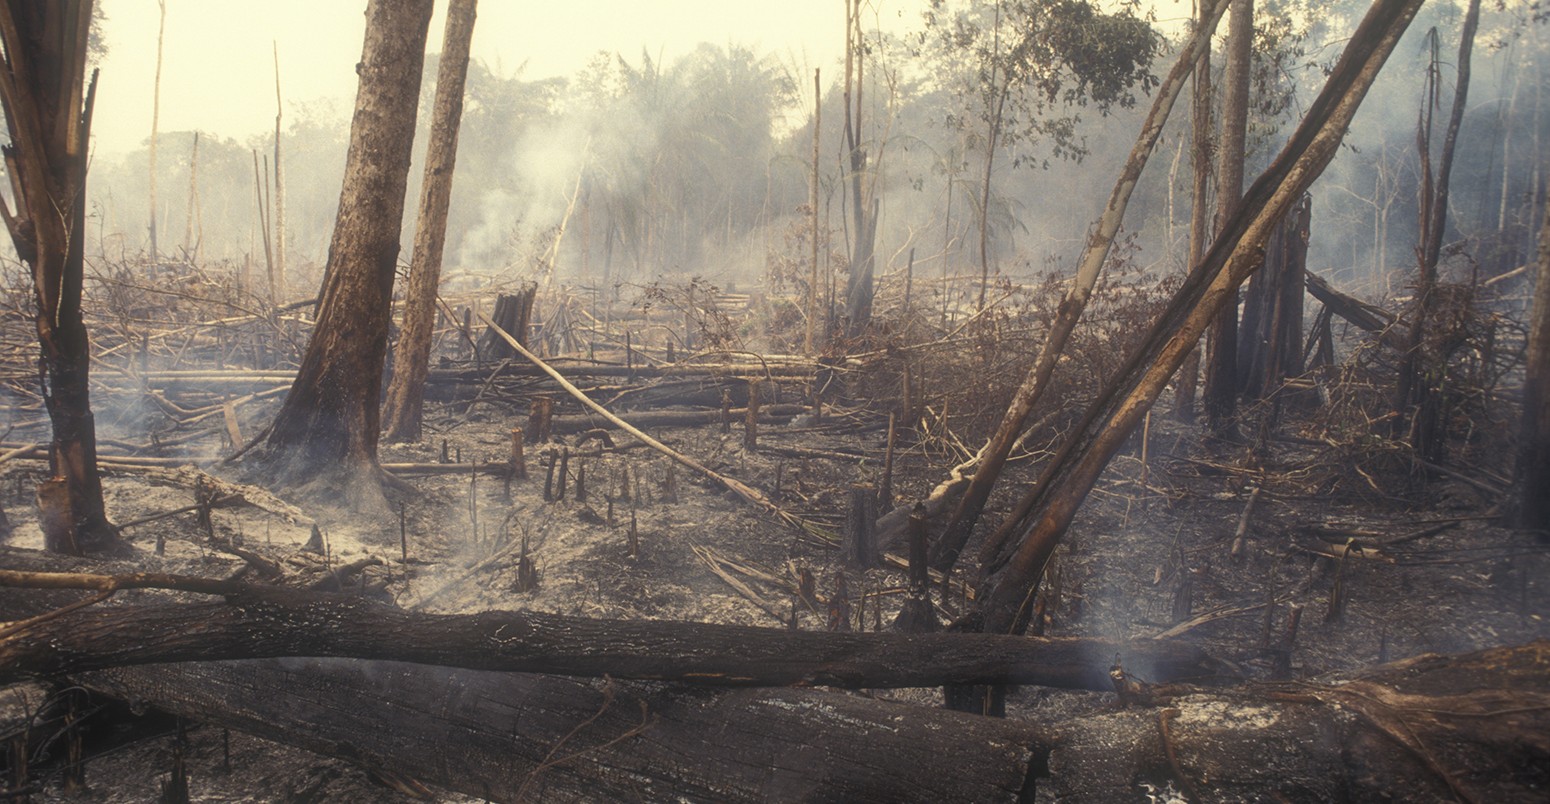 Slash and burn deforestation in the amazon rainforest. 60-70 percent of deforestation in the Amazon results from cattle ranches and soyabeans cultivation while the rest mostly results from small-scale subsistence agriculture.